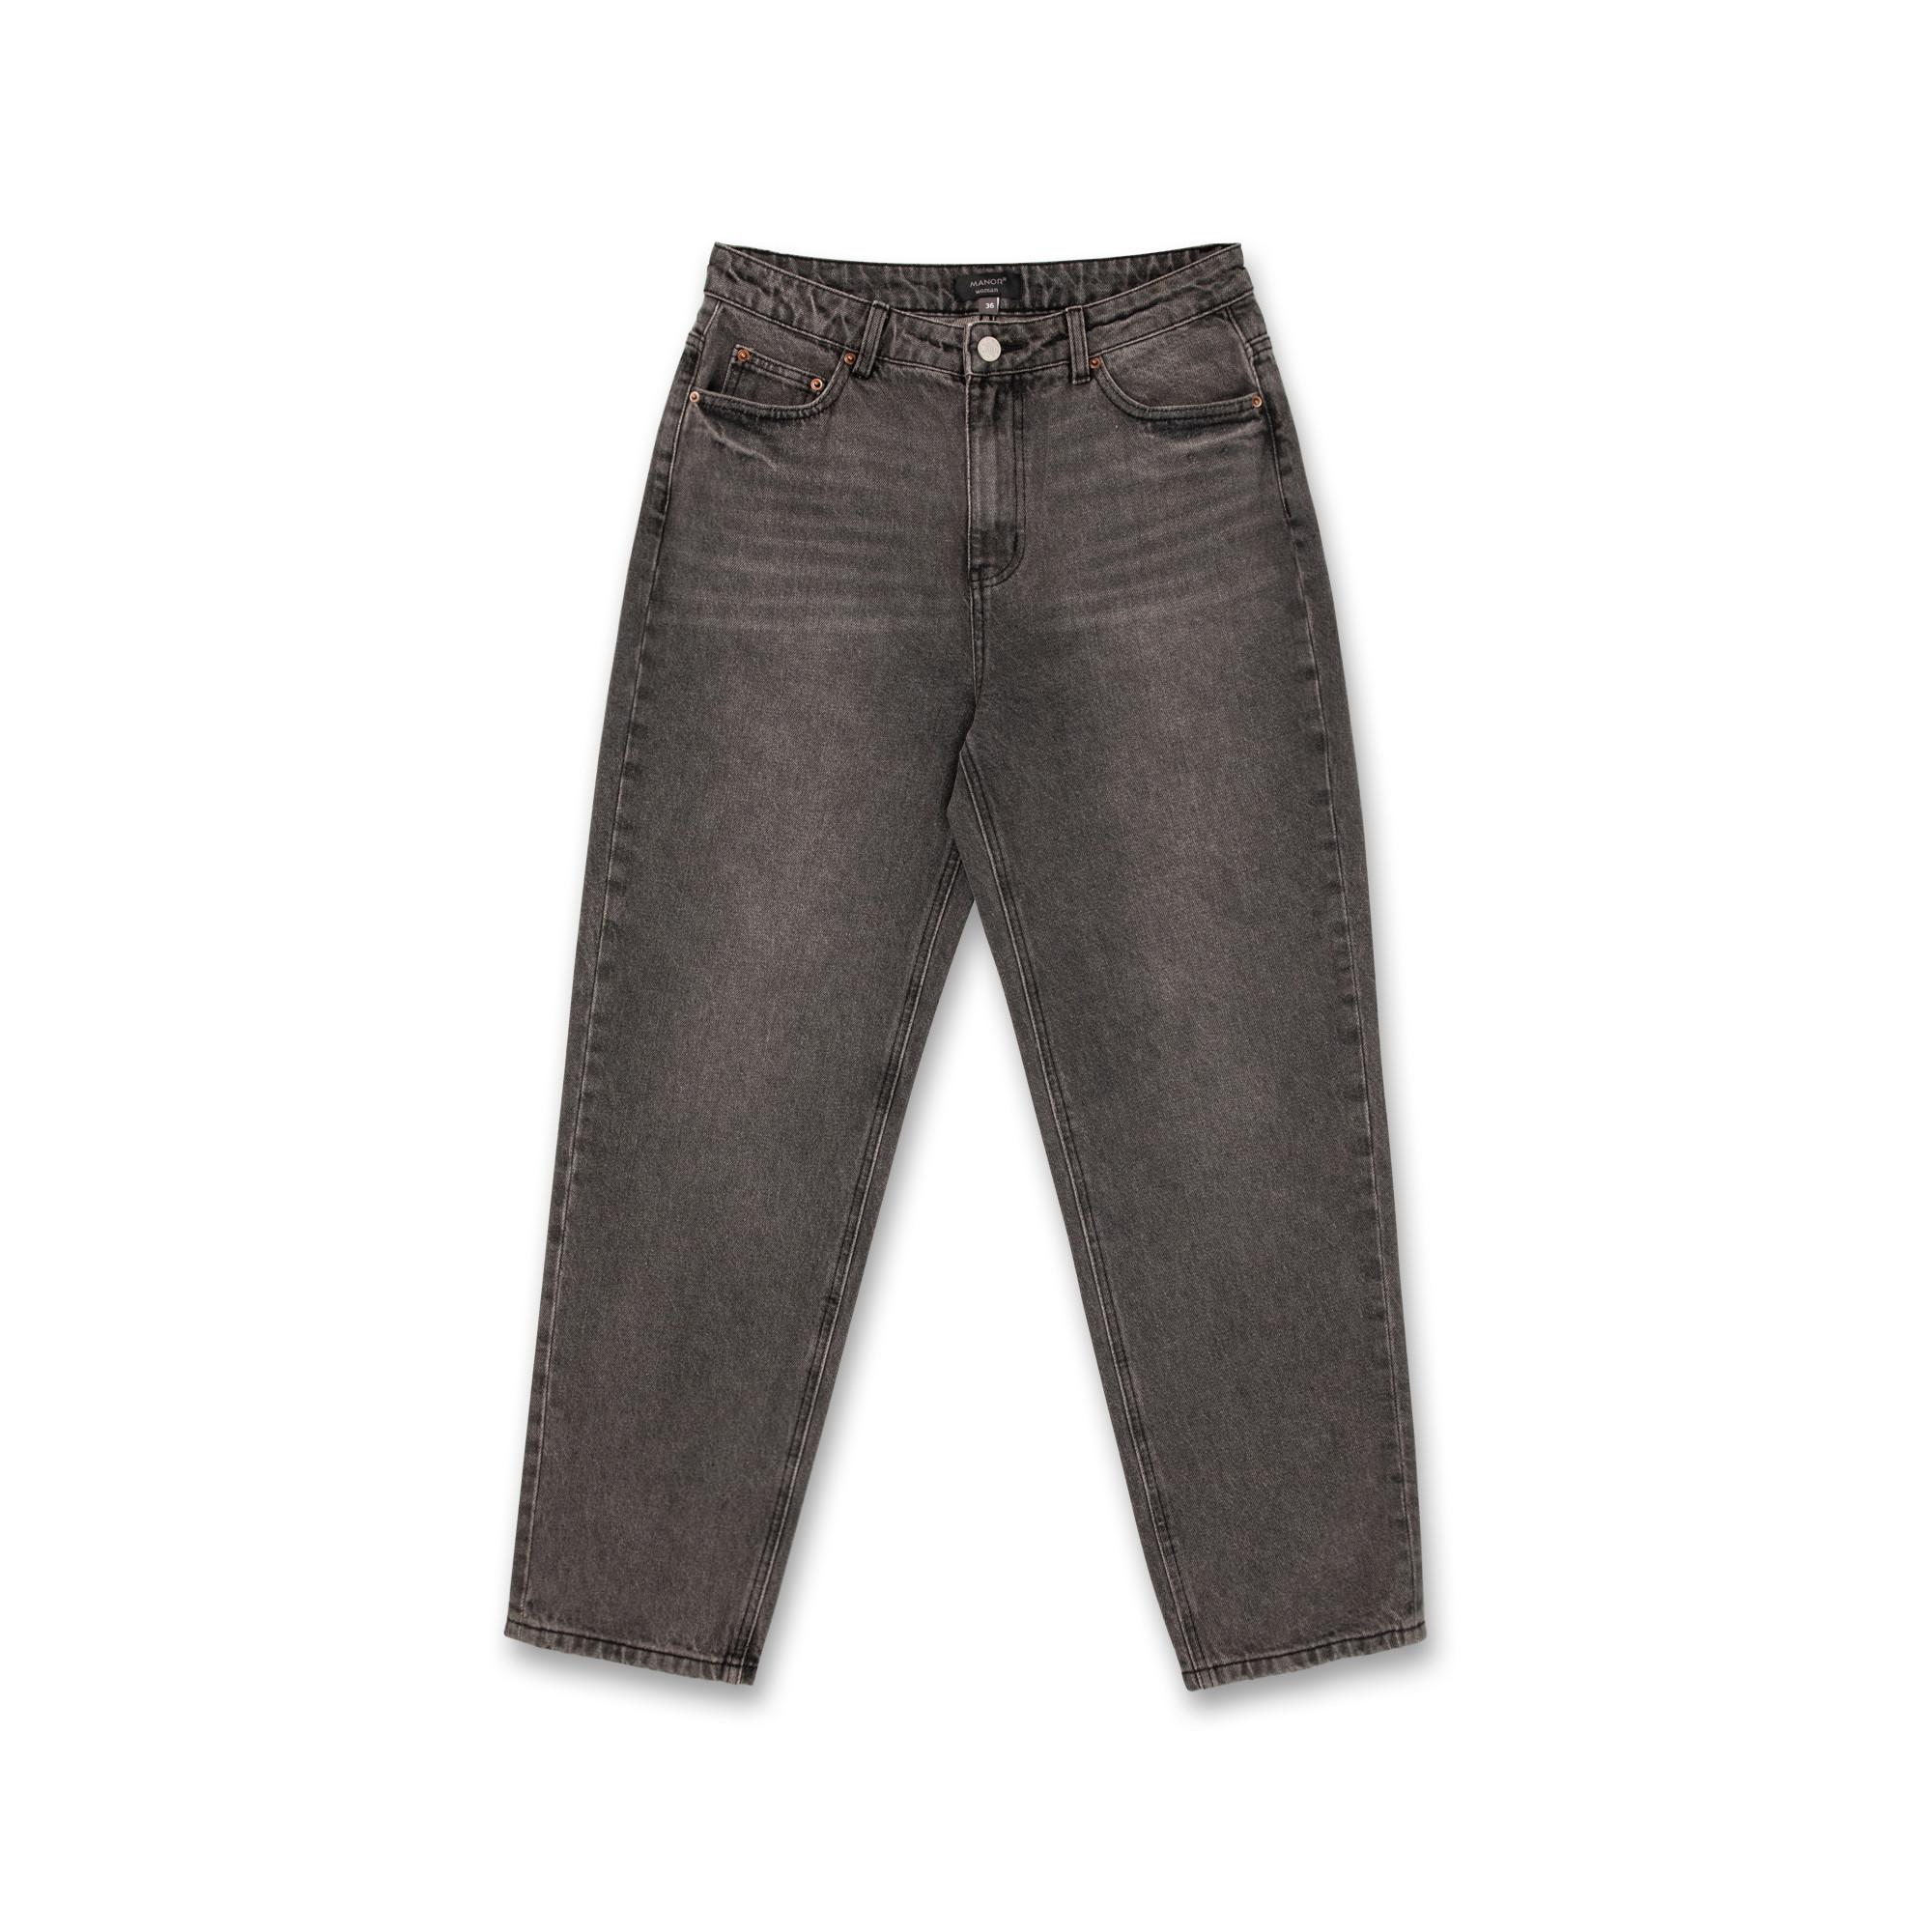 Manor Woman  Jeans, Straight Leg Fit 